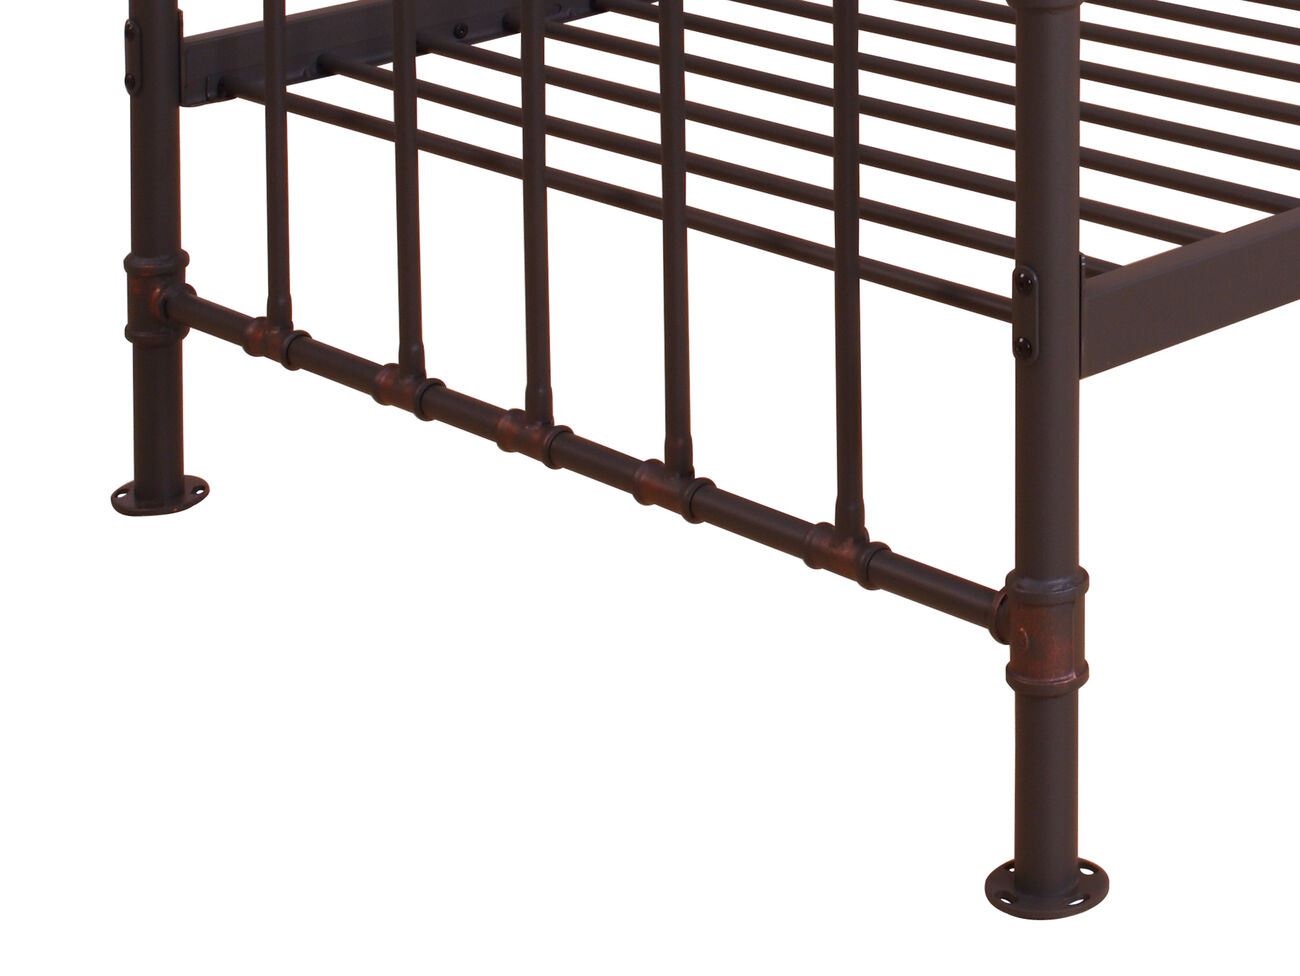 Industrial Style Metal Twin Size Bed with Pipe Inspired Frame, Brown